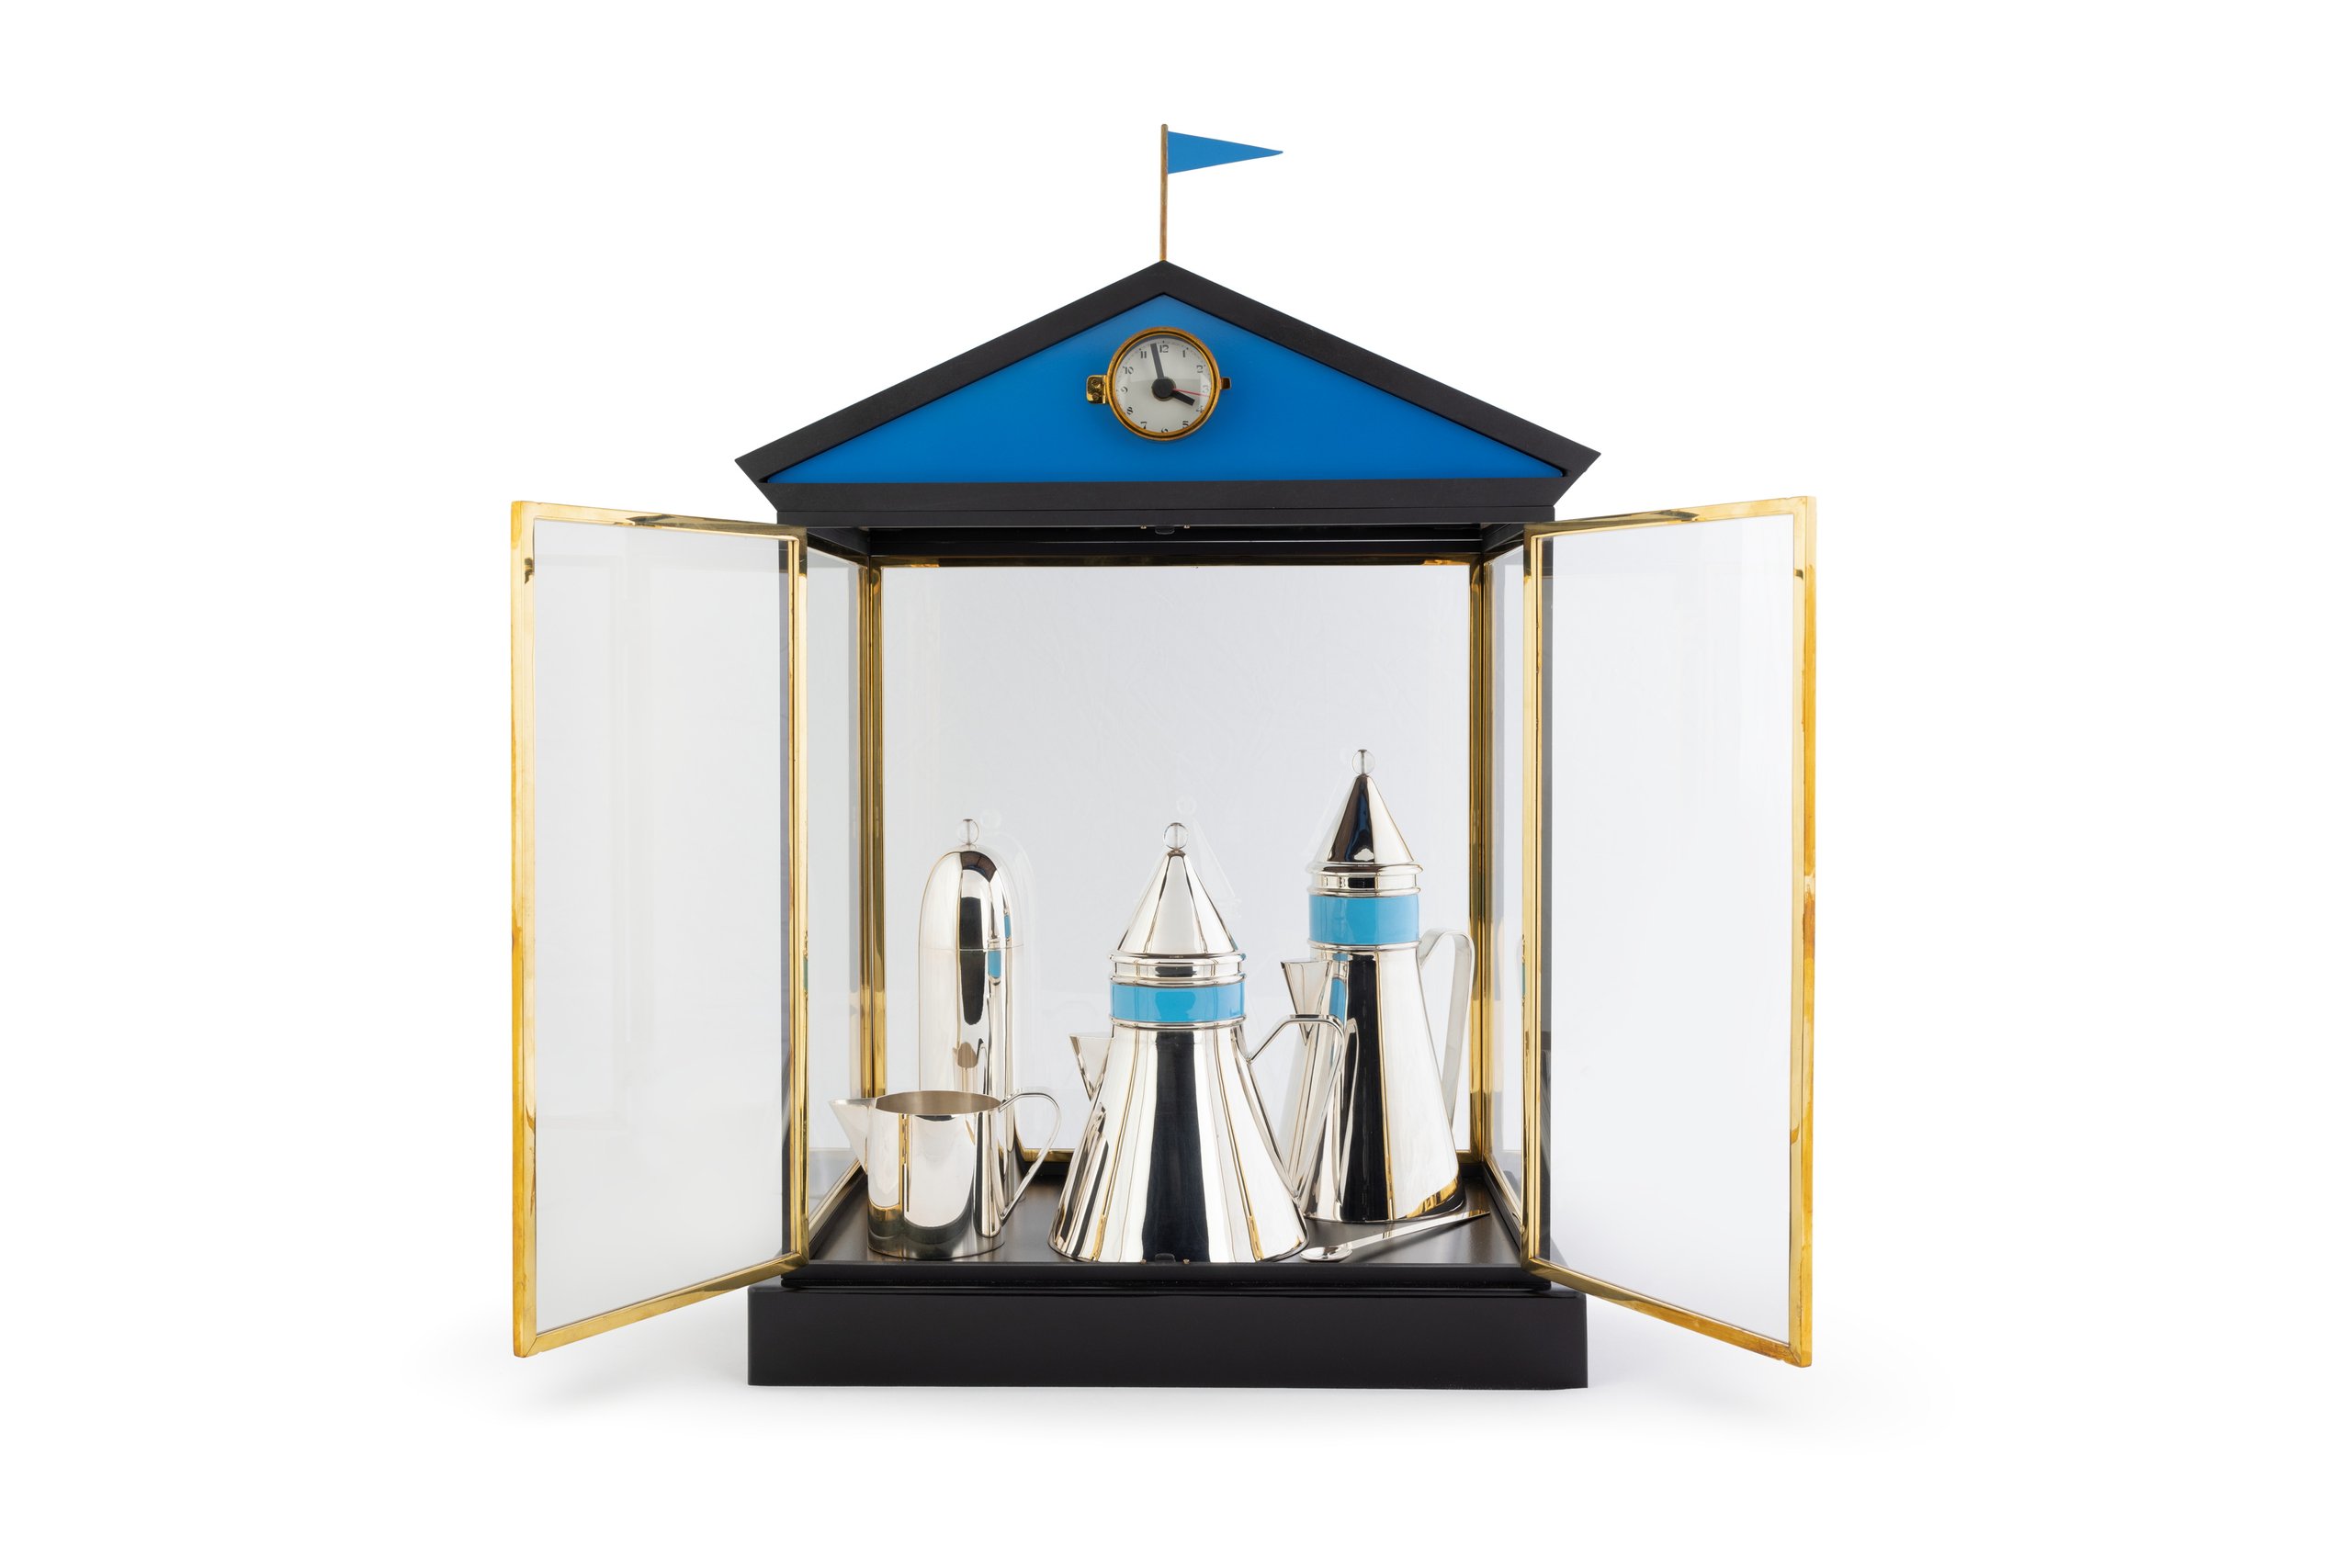 'Tea and coffee piazza' set designed by Aldo Rossi